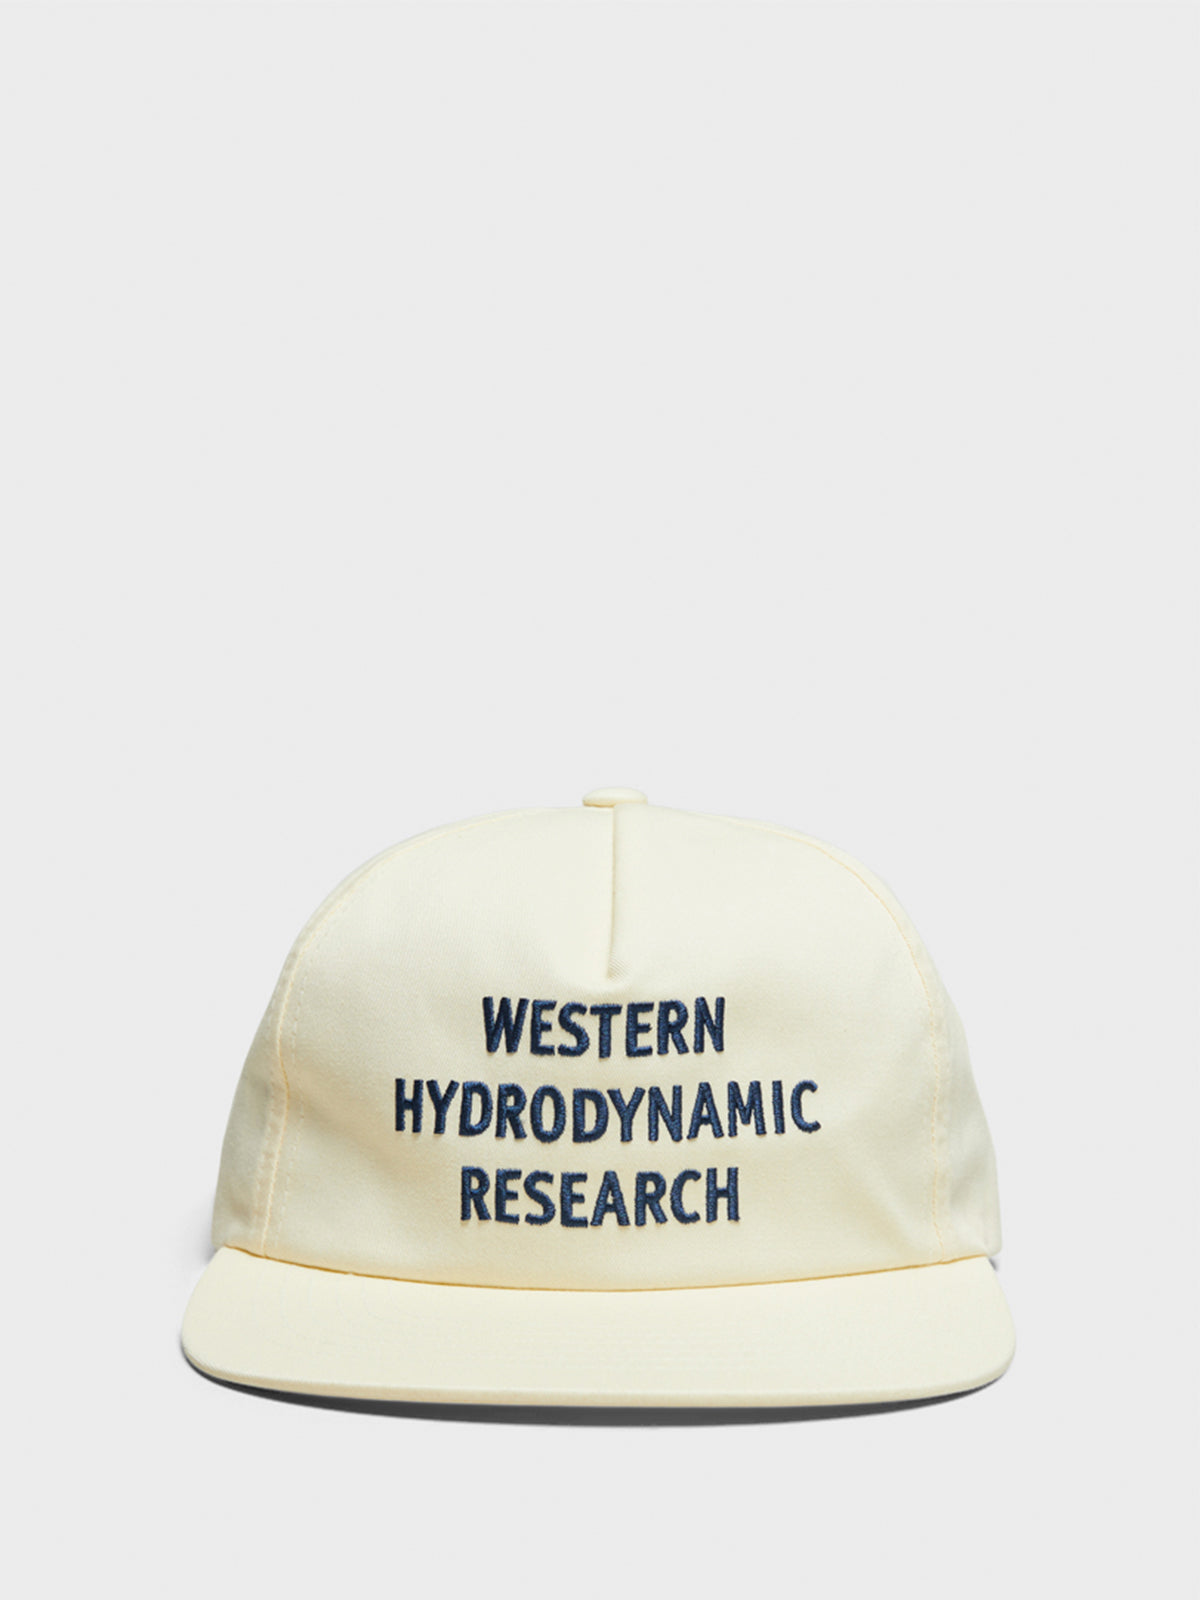 Promo Hat in White and Navy